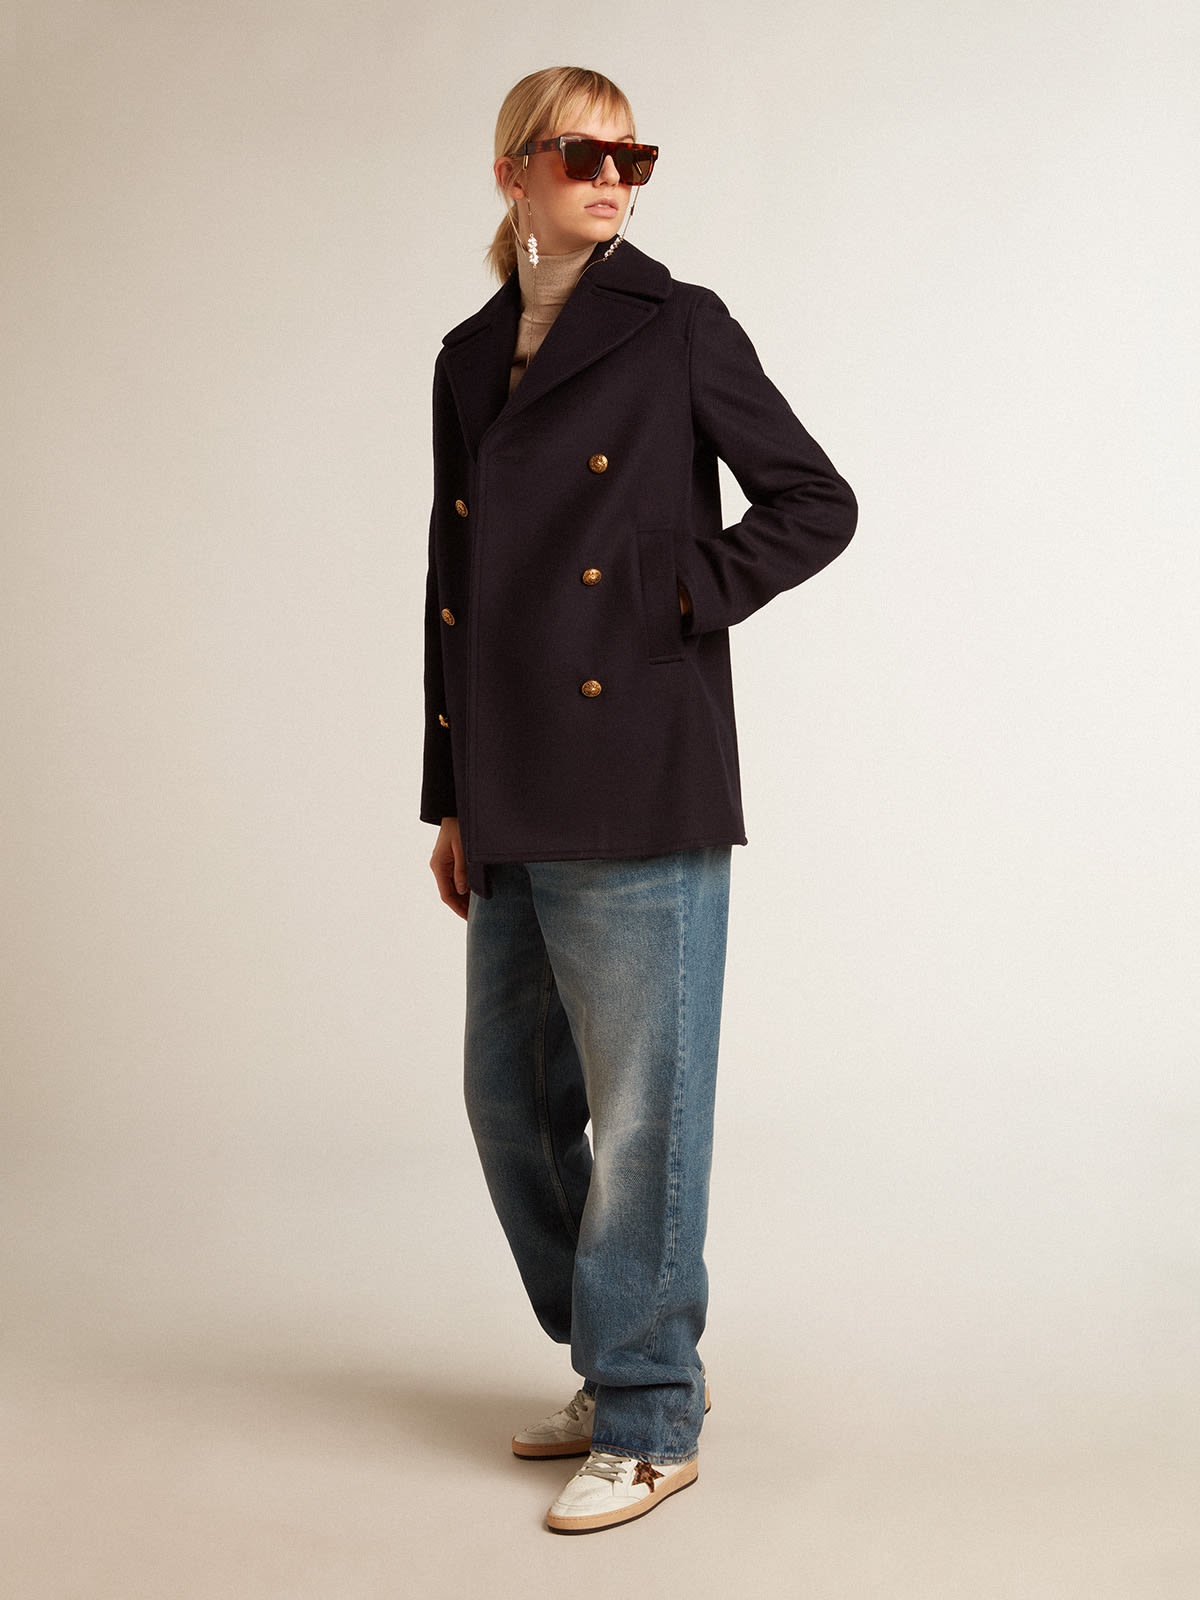 Women’s one-and-a-half-breasted coat in bark-colored wool